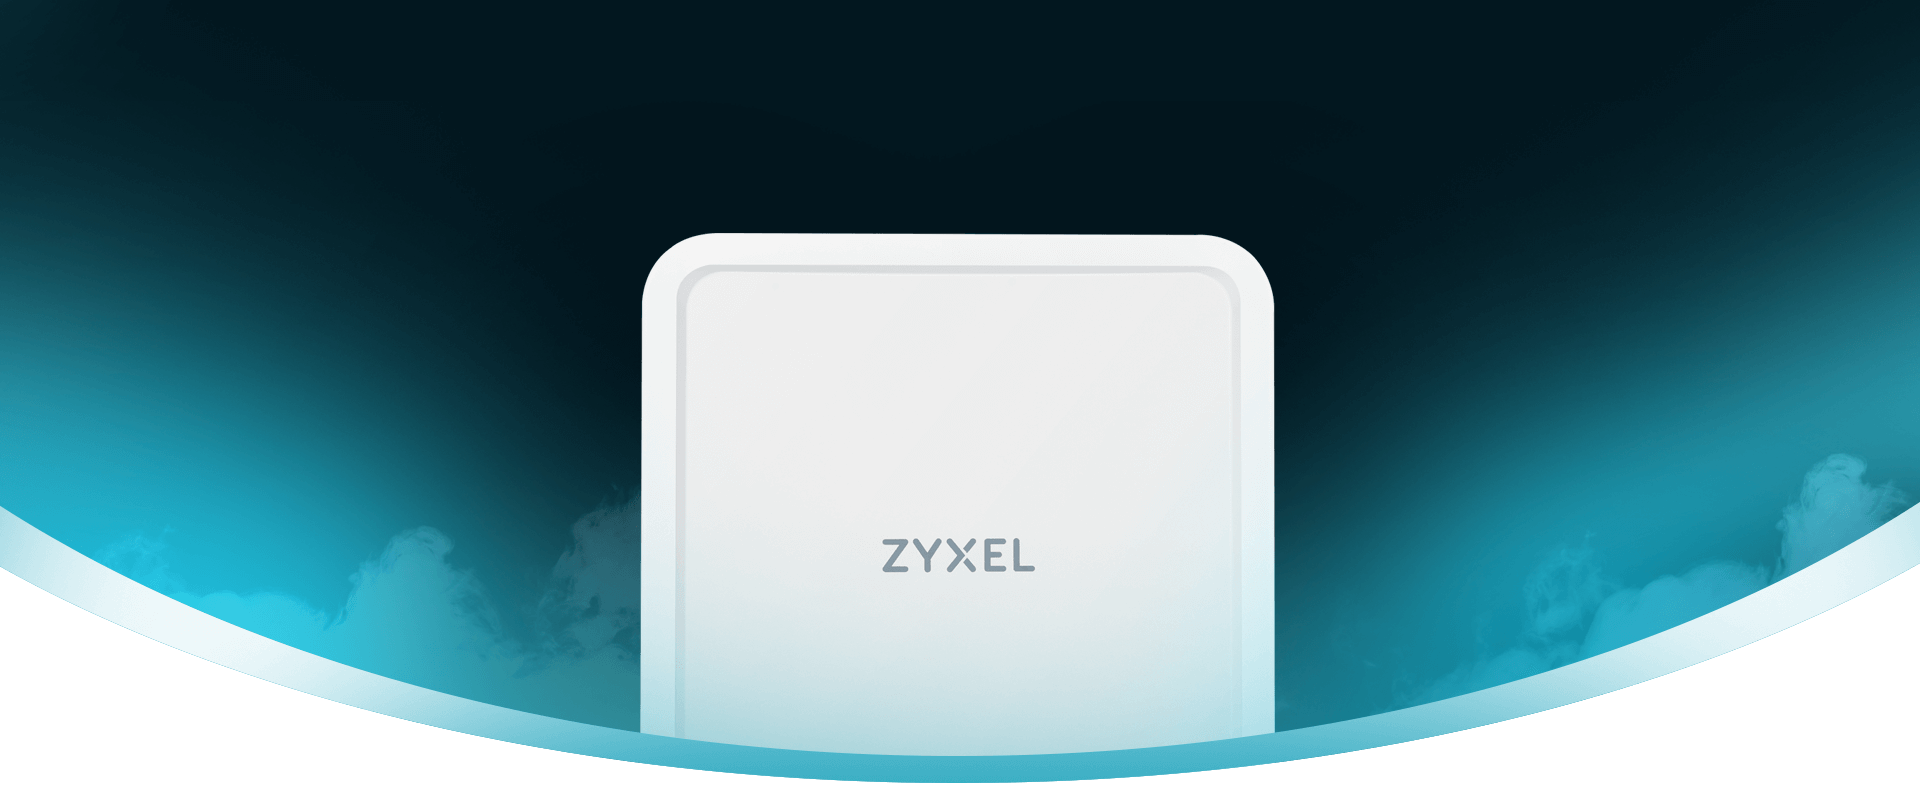 NR7101 - 5G NR Outdoor Router | Zyxel Networks